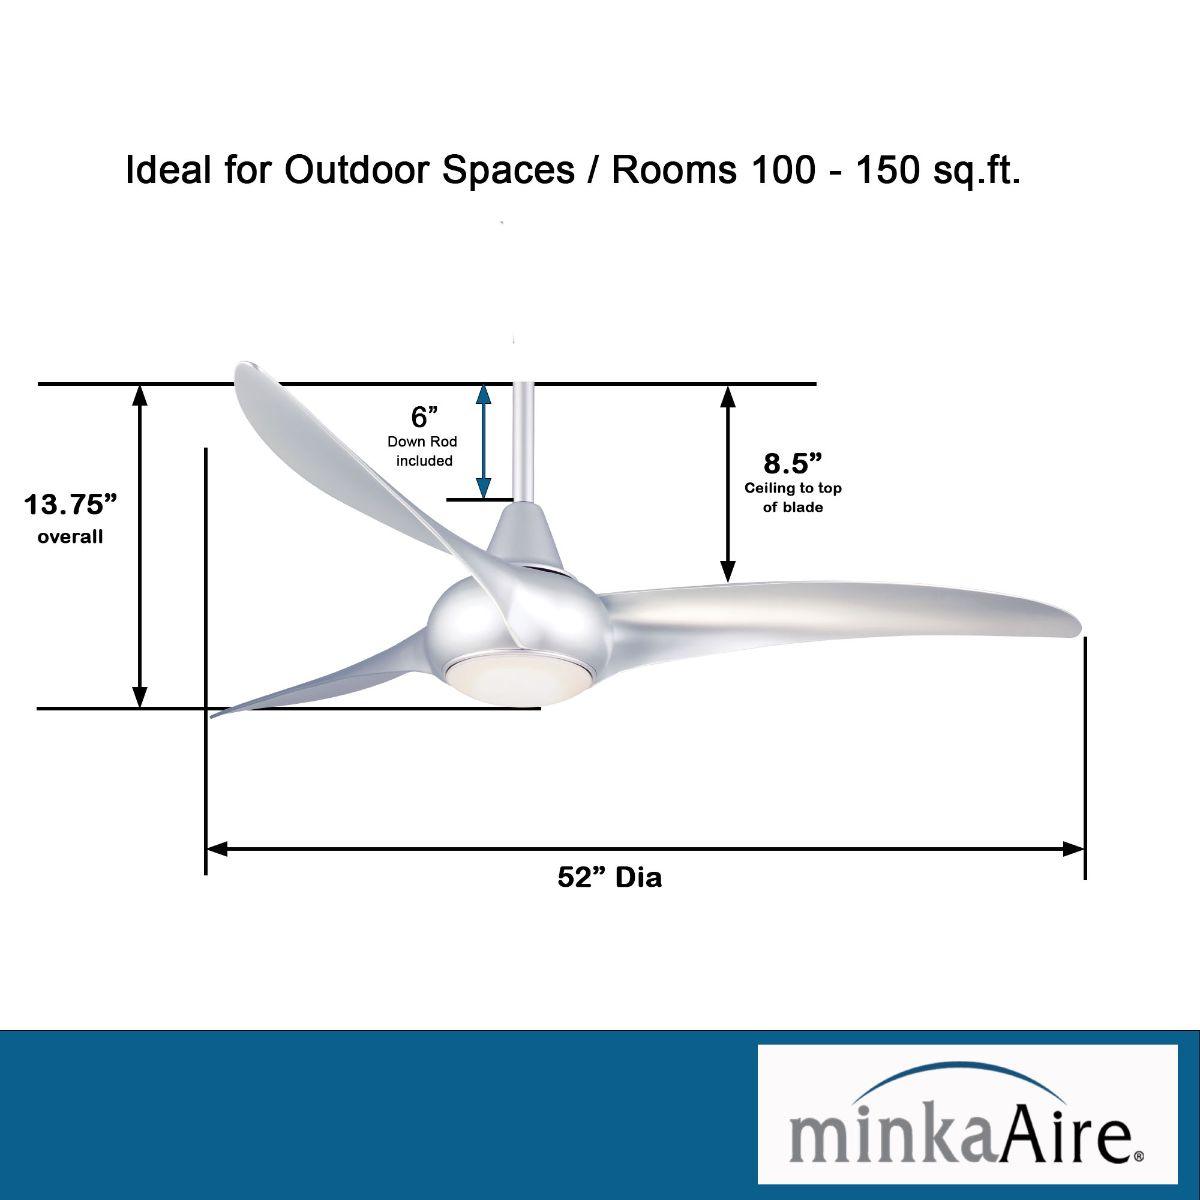 Light Wave 52 Inch Modern Propeller Ceiling Fan With Light And Remote - Bees Lighting